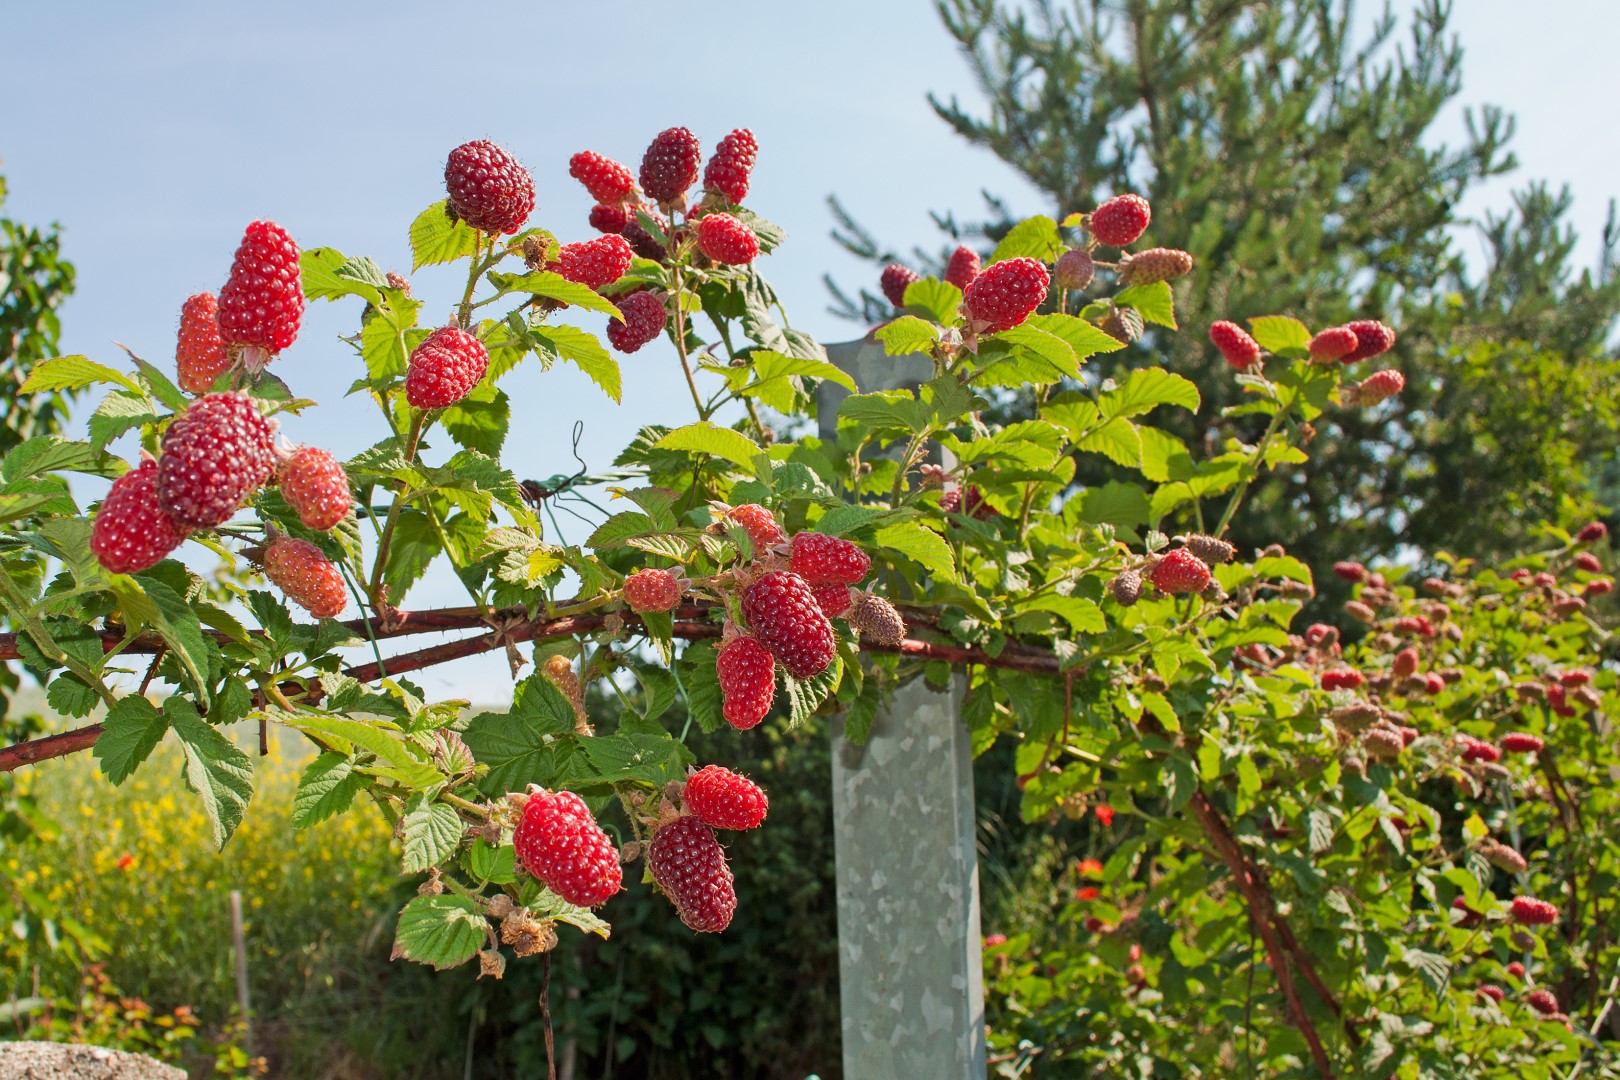 How to Grow Raspberries? Facts Every Gardener Should Know